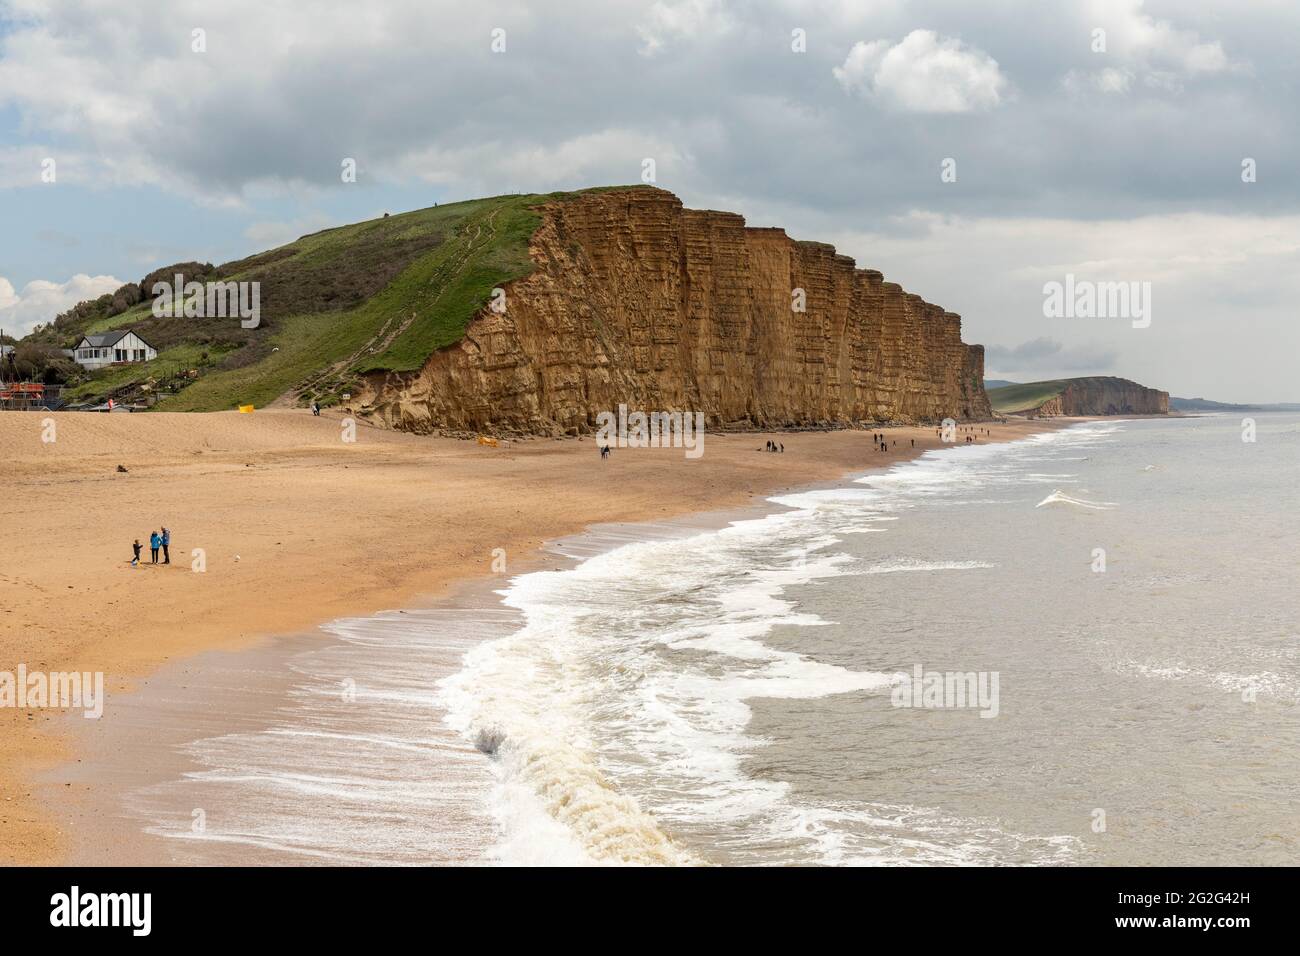 The limestone cliffs and picturesque beach at East Beach, West Bay, Dorset, England, UK Stock Photo